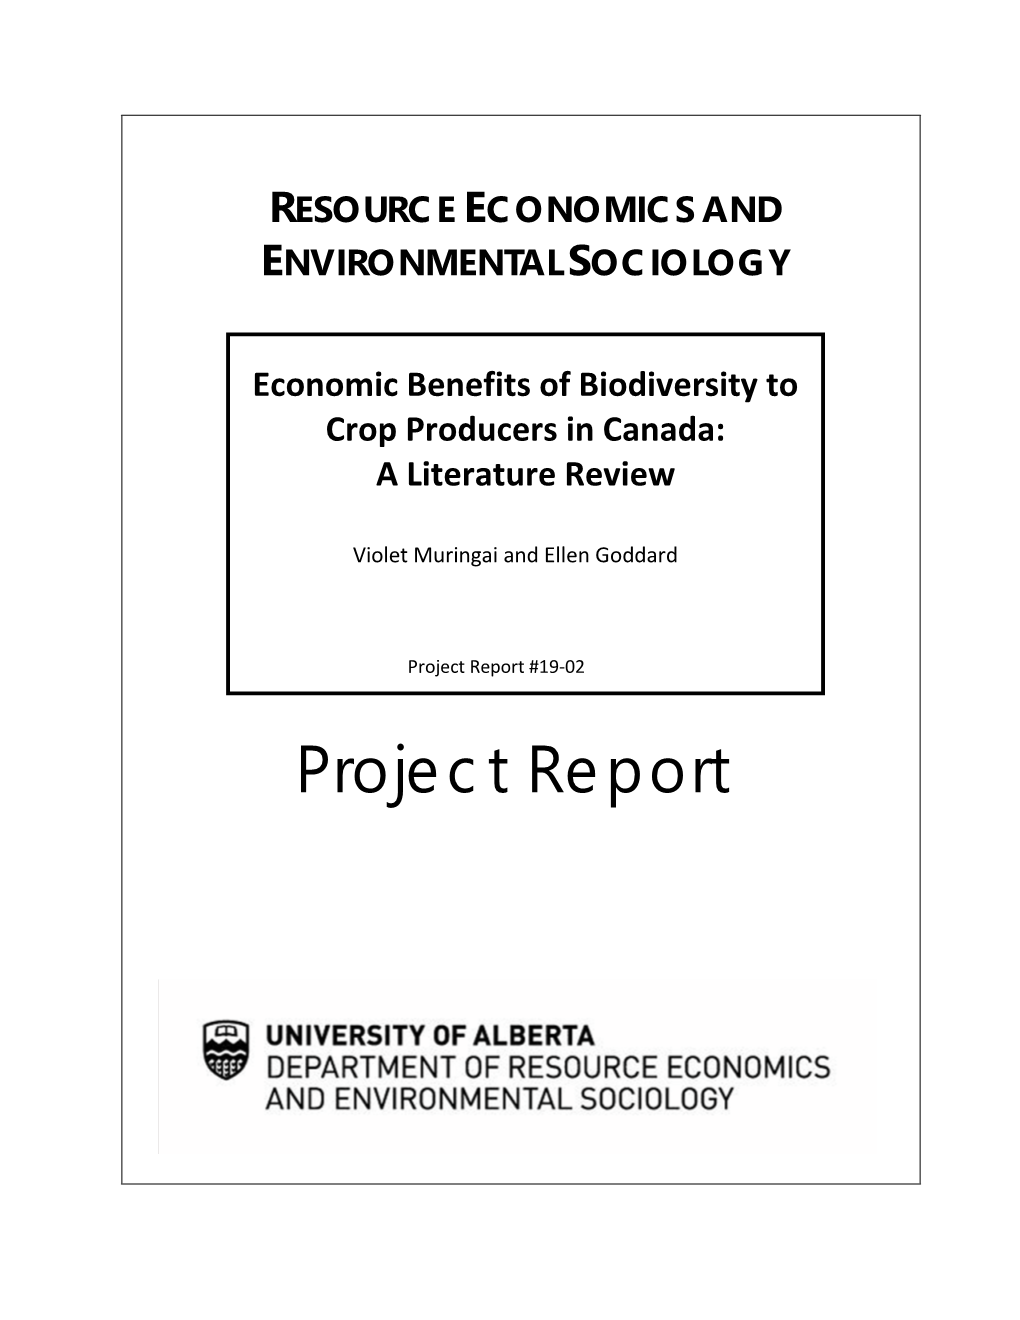 Economic Benefits of Biodiversity to Crop Producers in Canada: a Literature Review